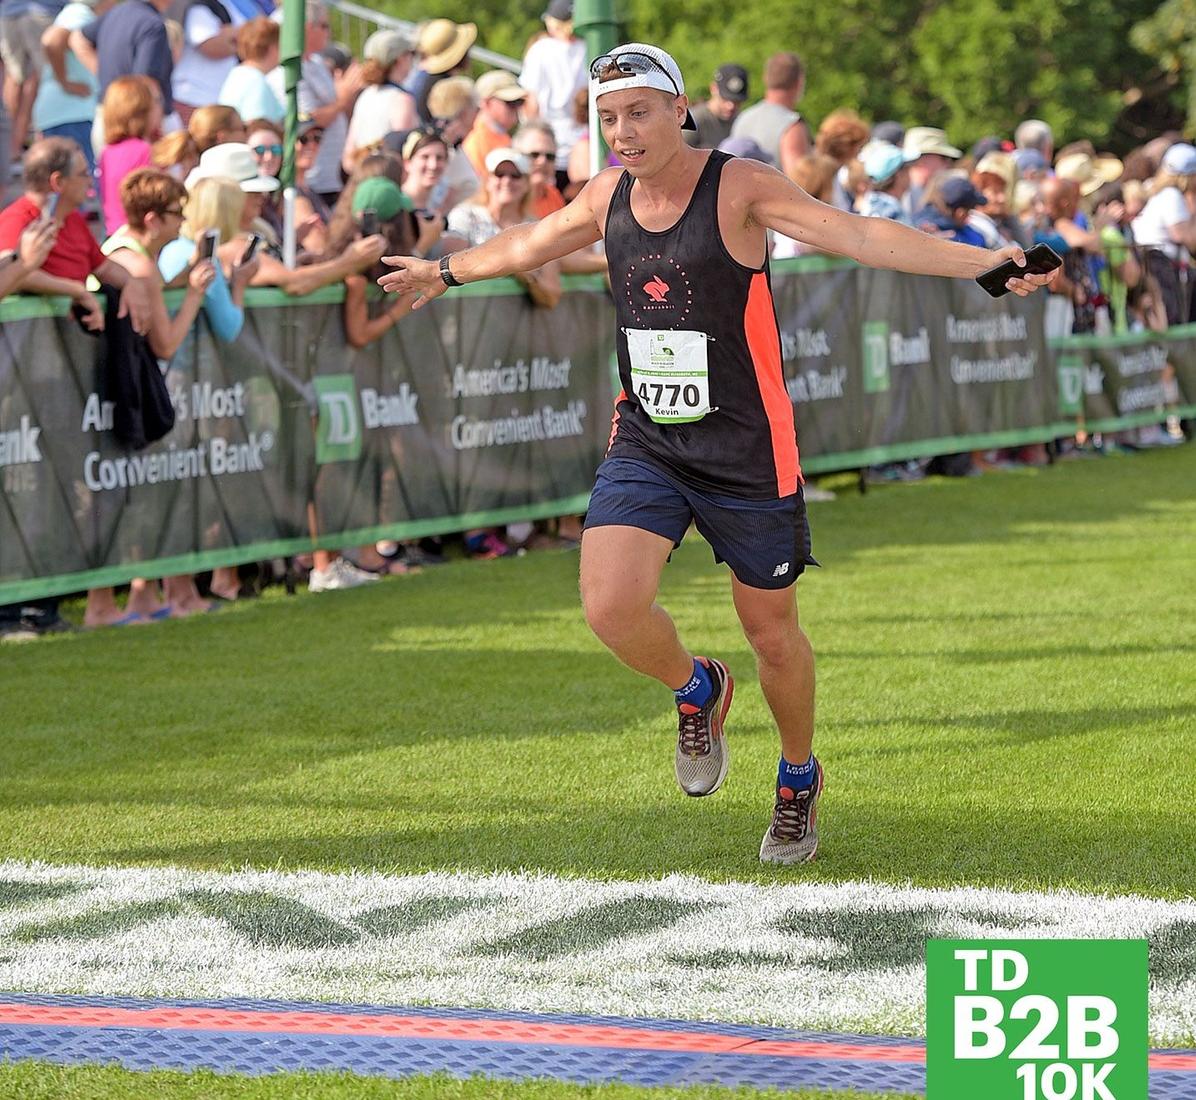 Coach Mitchell finishes strong at the 2019 Beach to Beacon 10K race